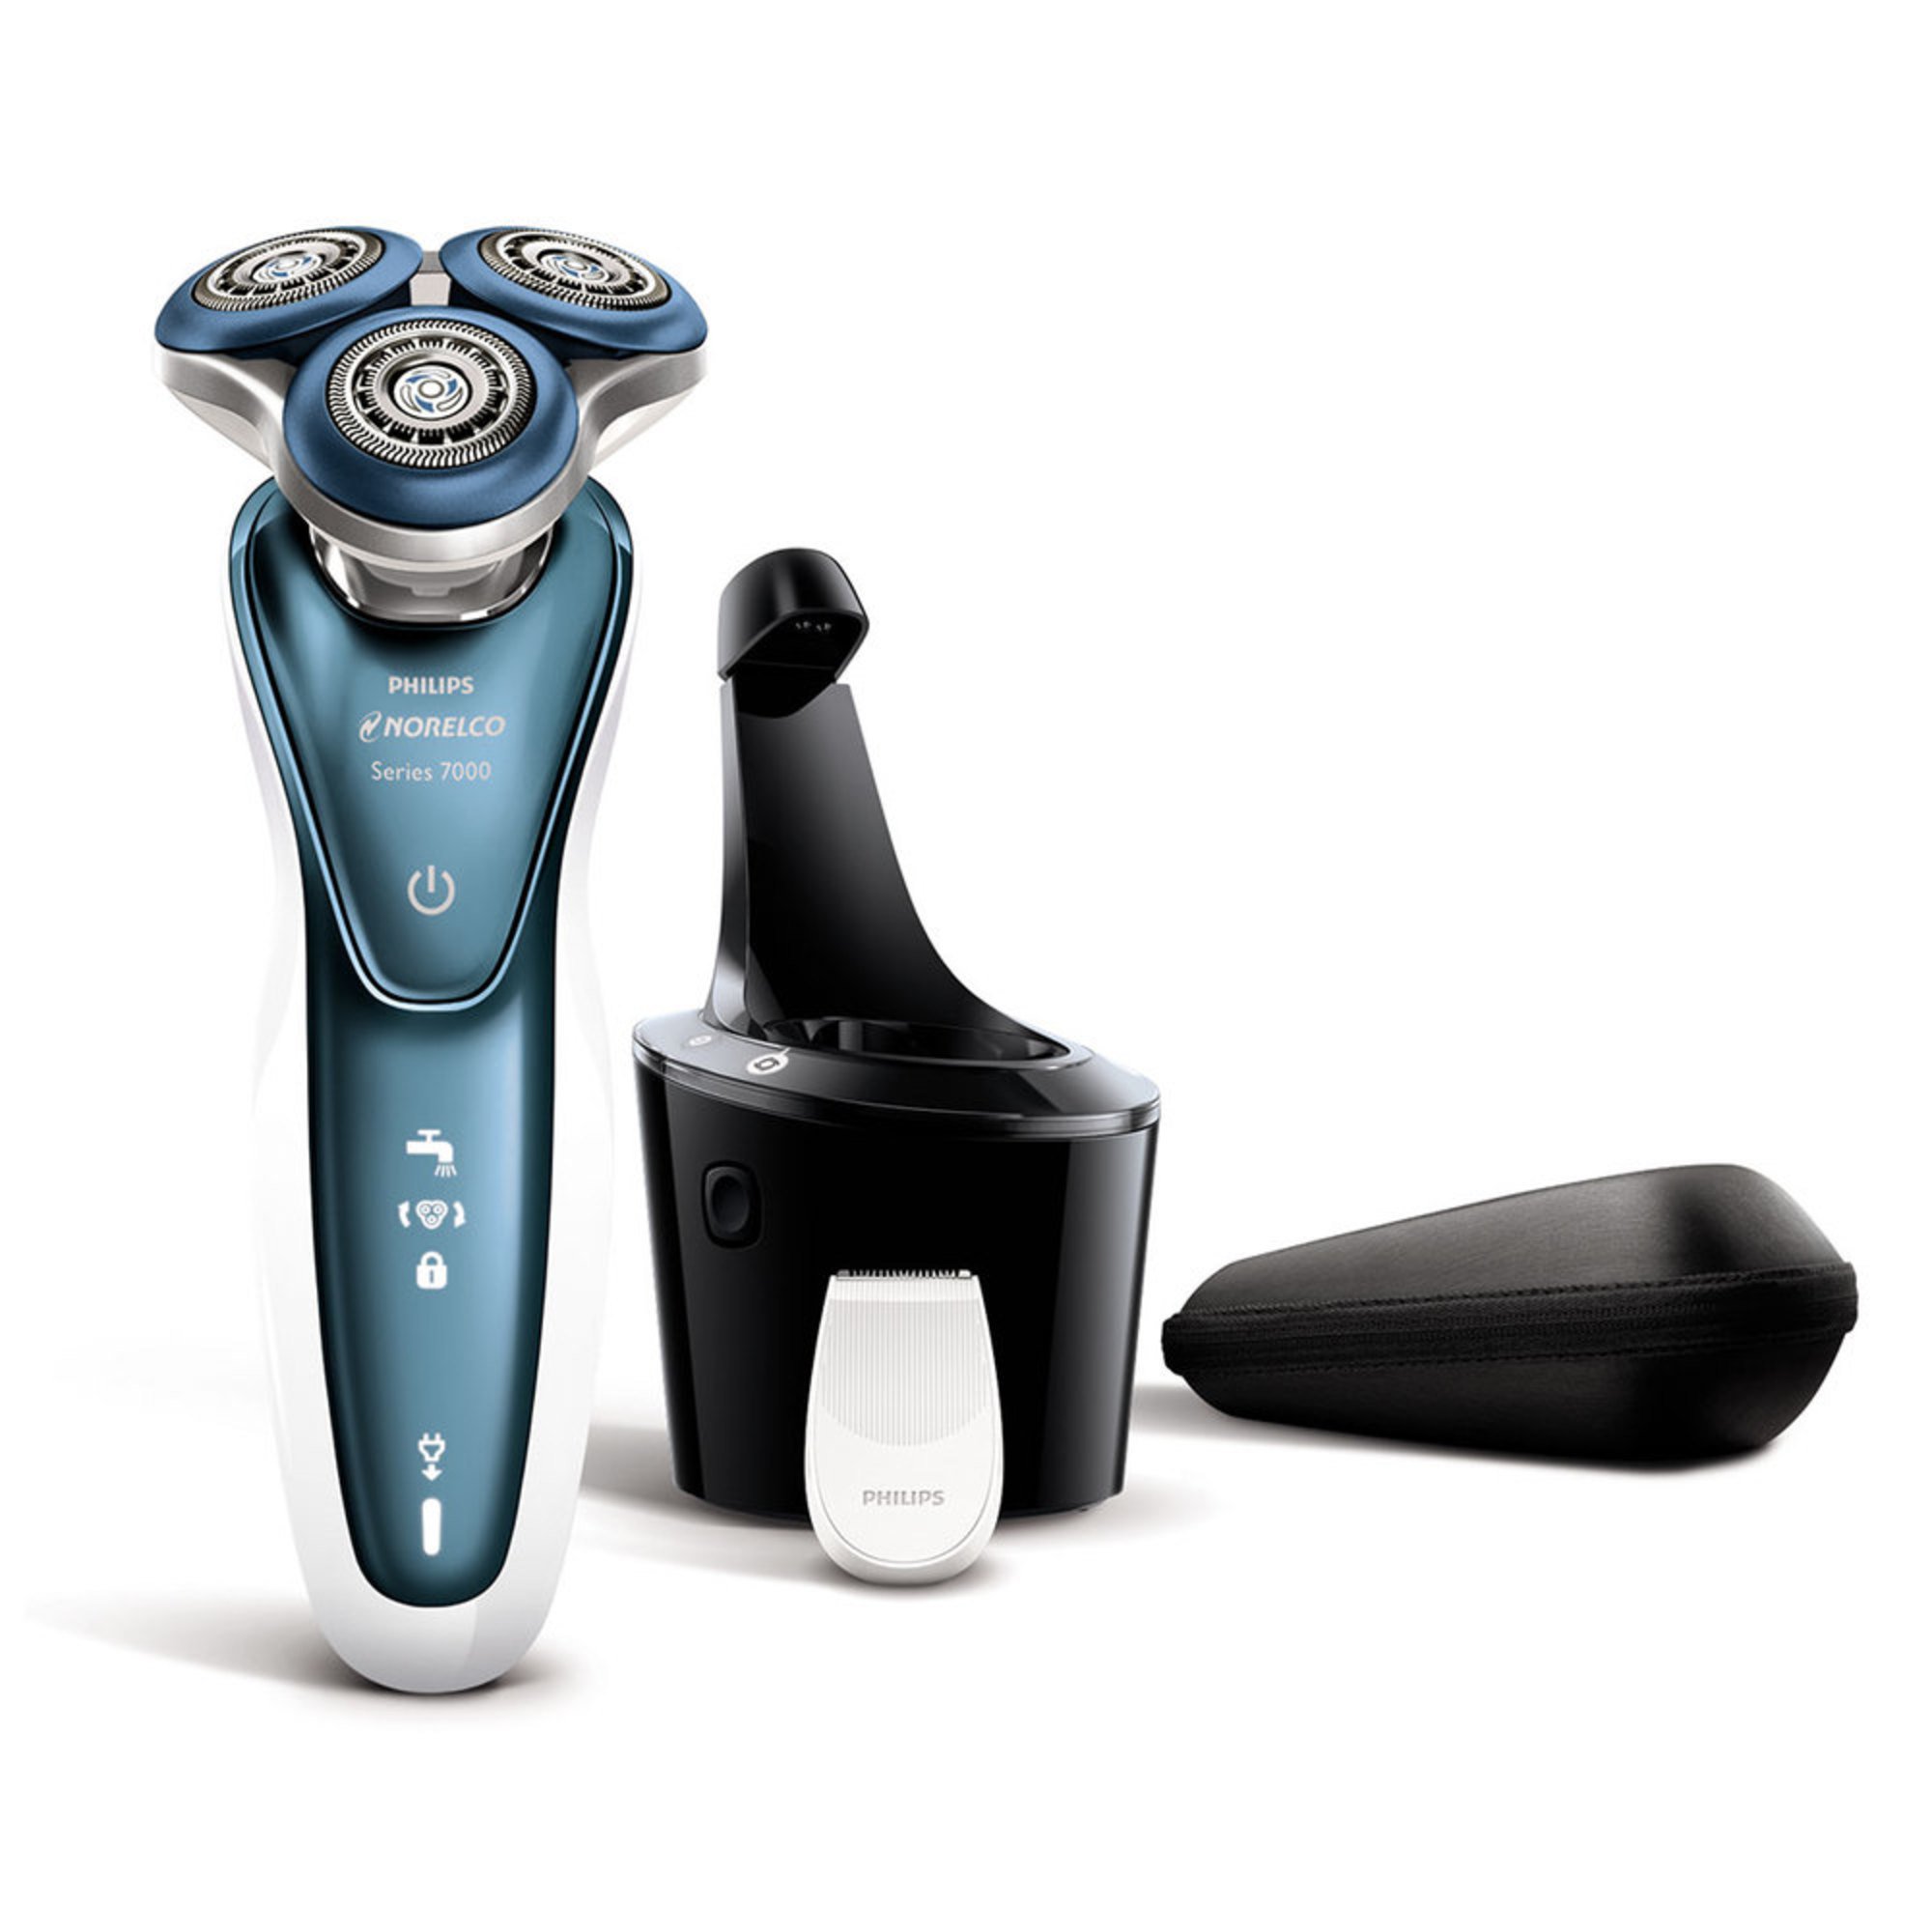 philips-norelco-shaver-7500-west-dry-electric-shaver-series-7000